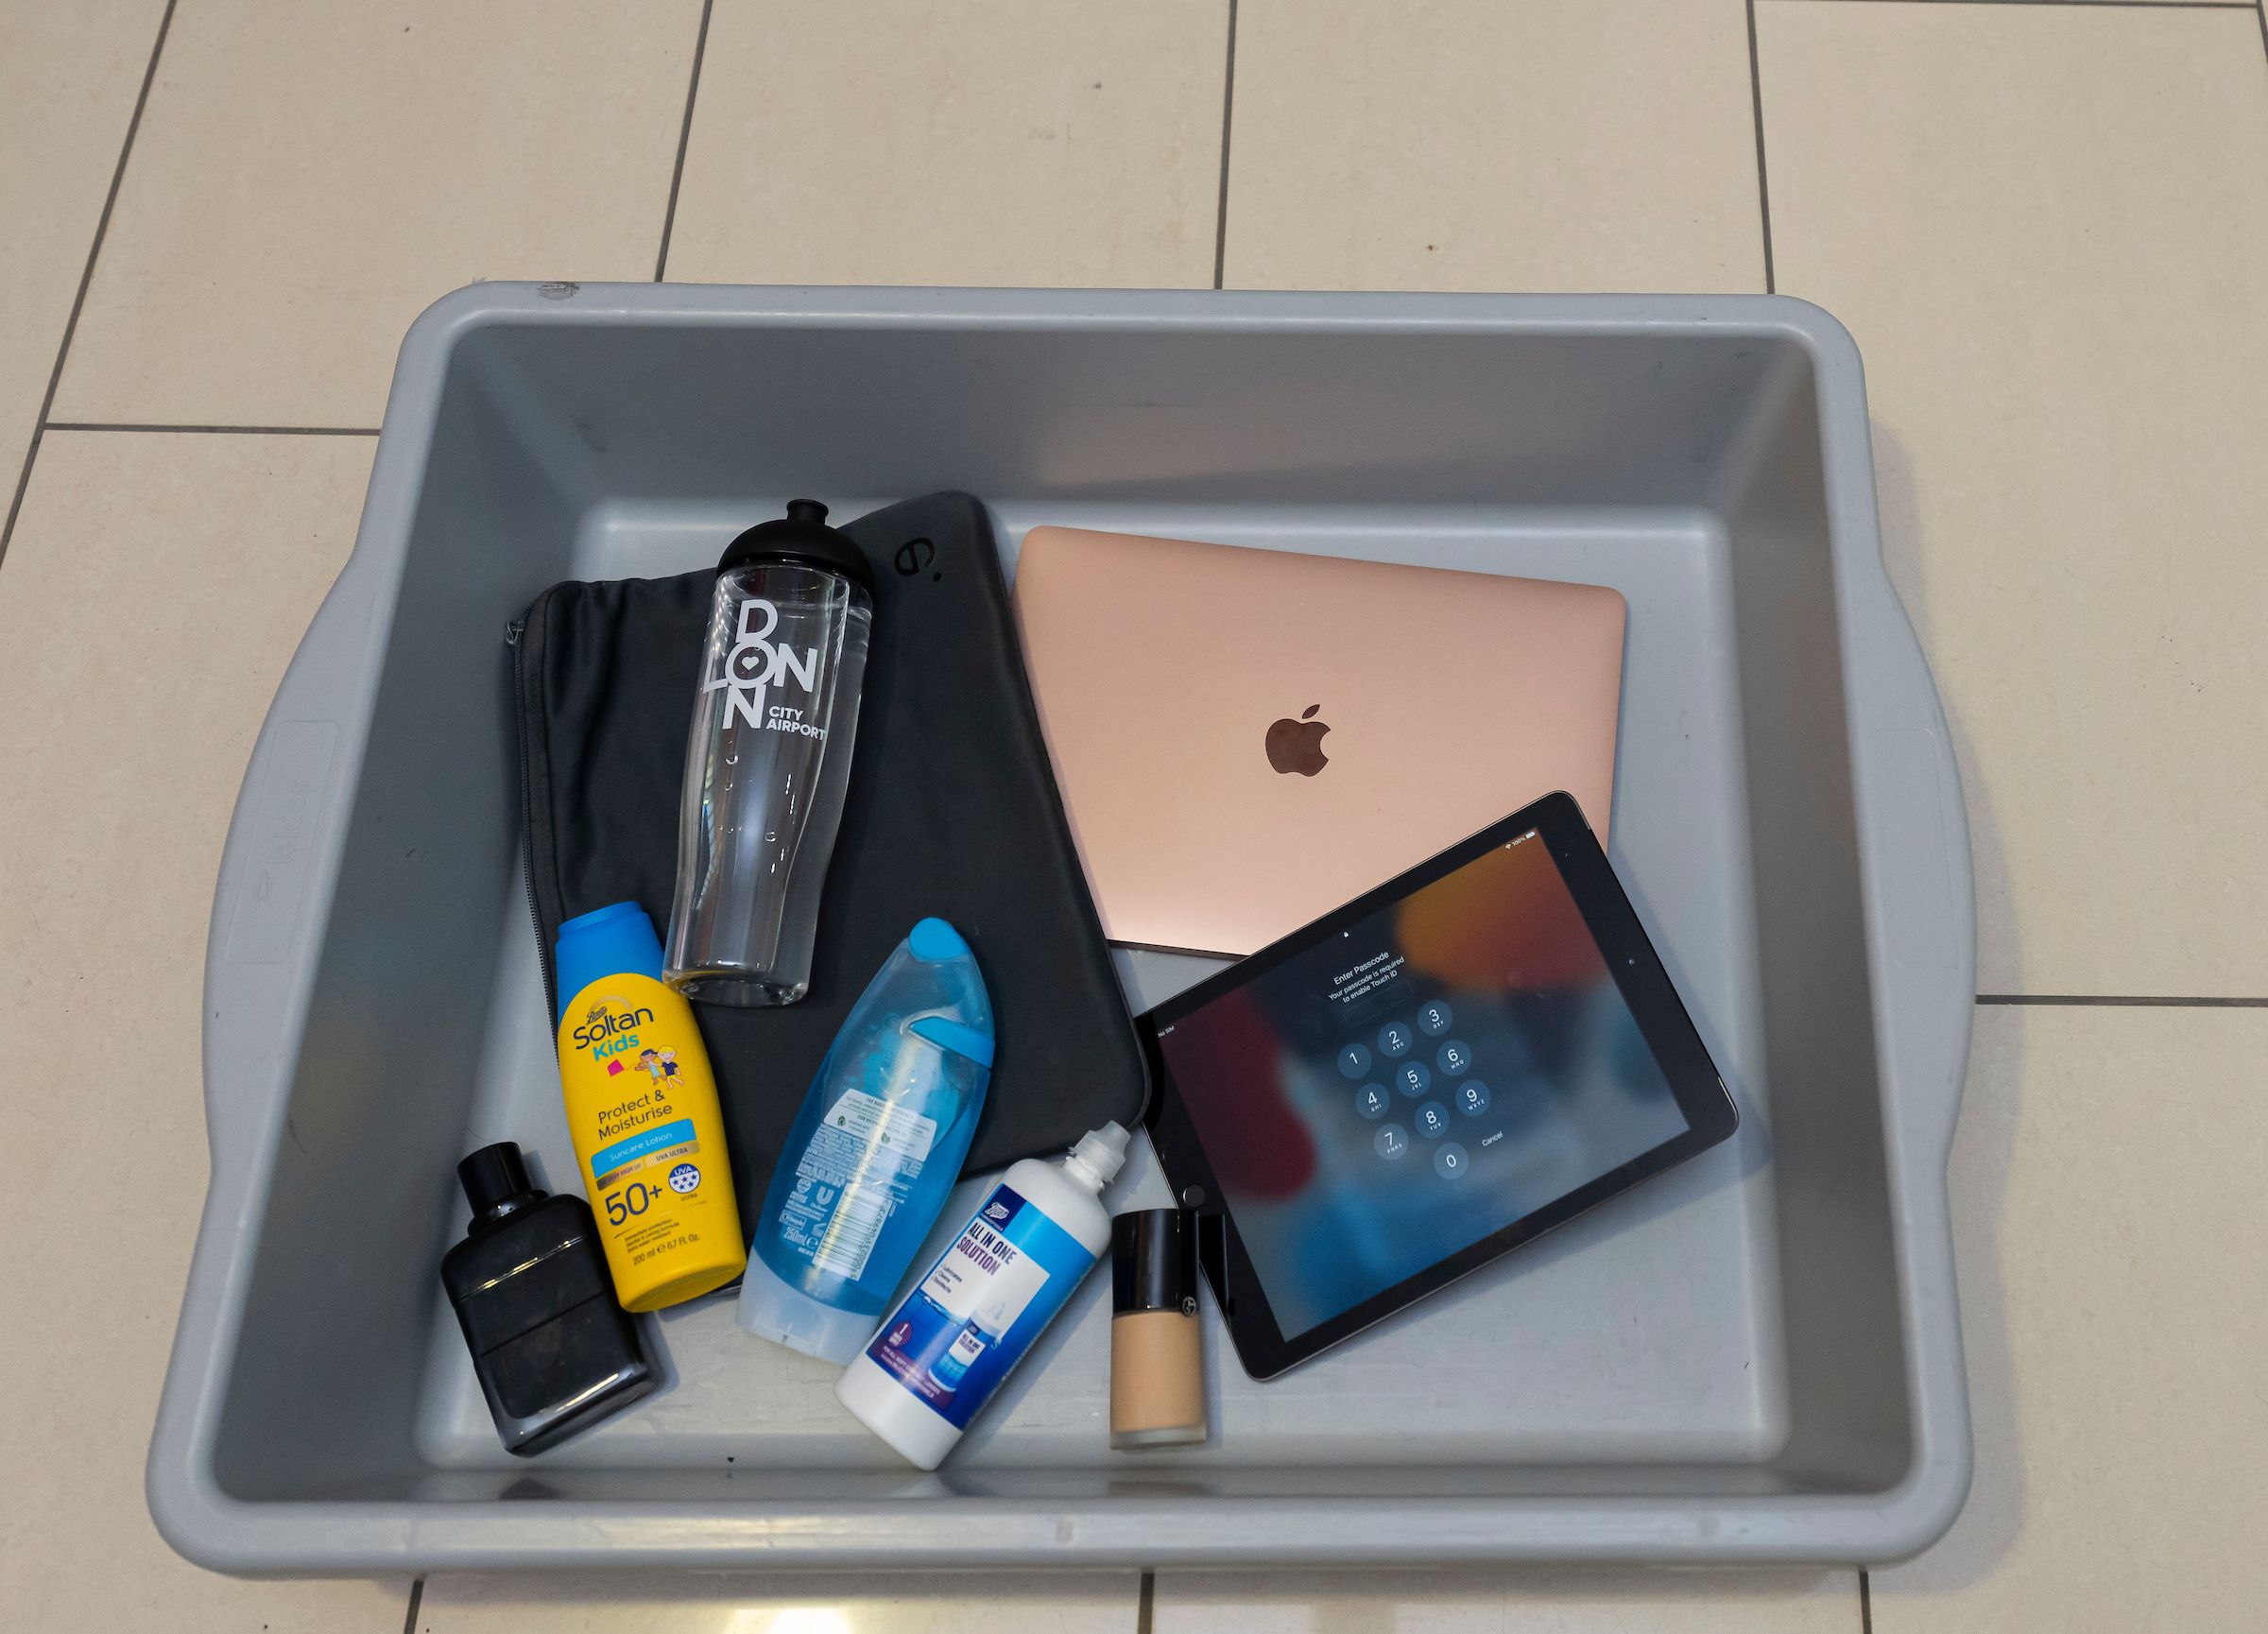 Large liquids and electronic devices in an airport security tray.